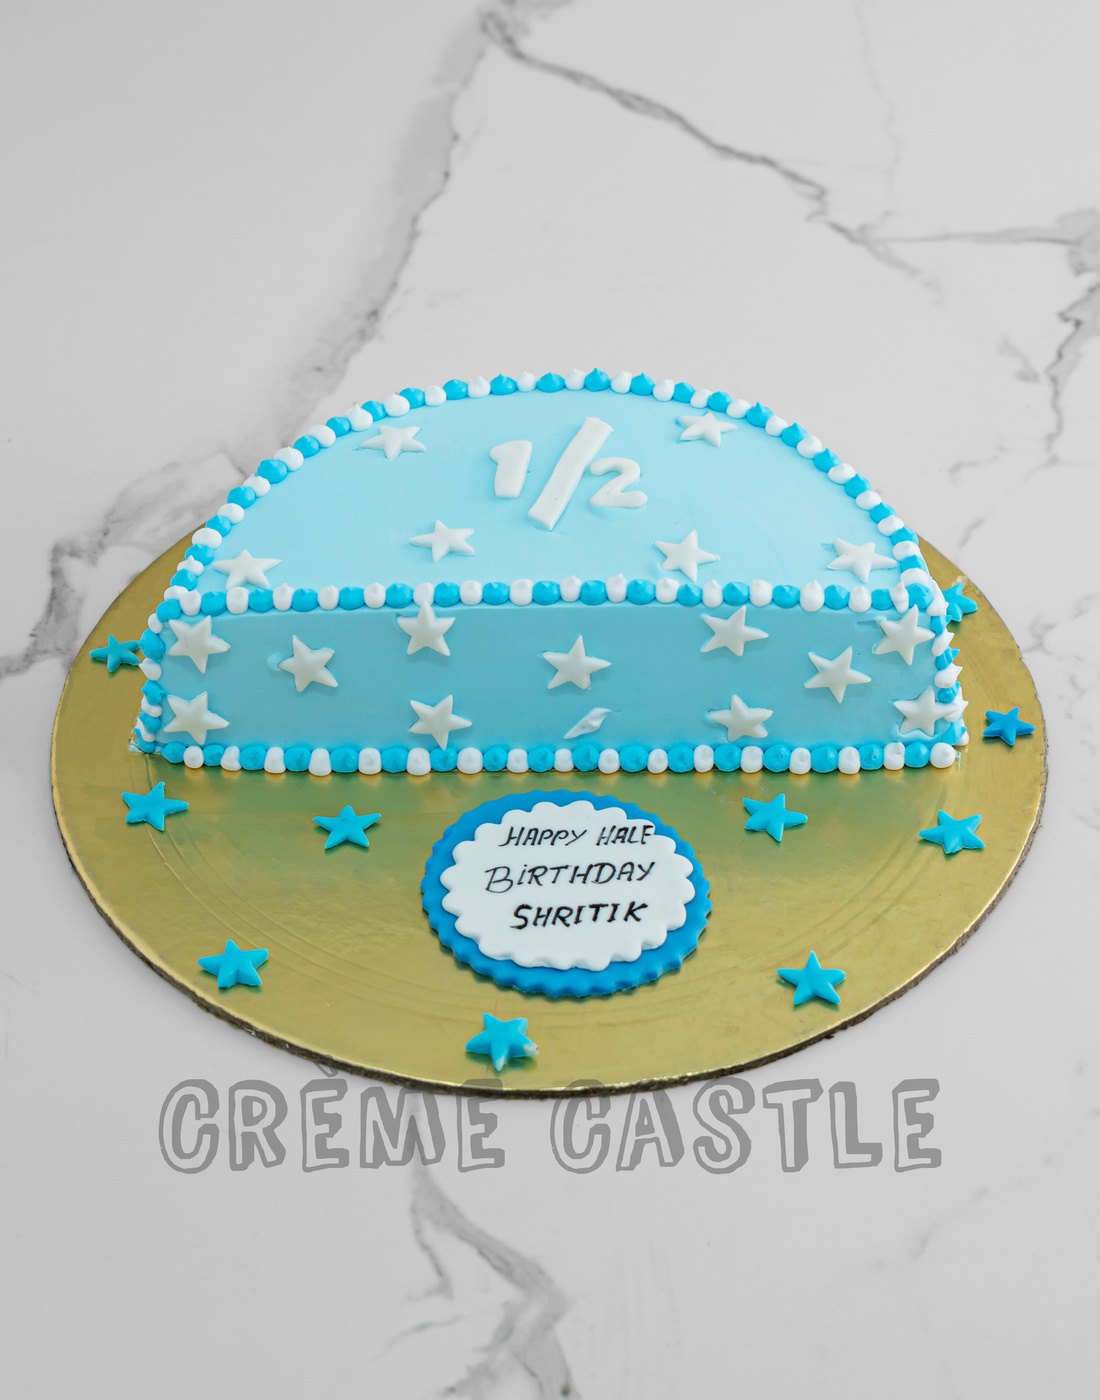 6 Months cake in Classic Blue by Creme Castle